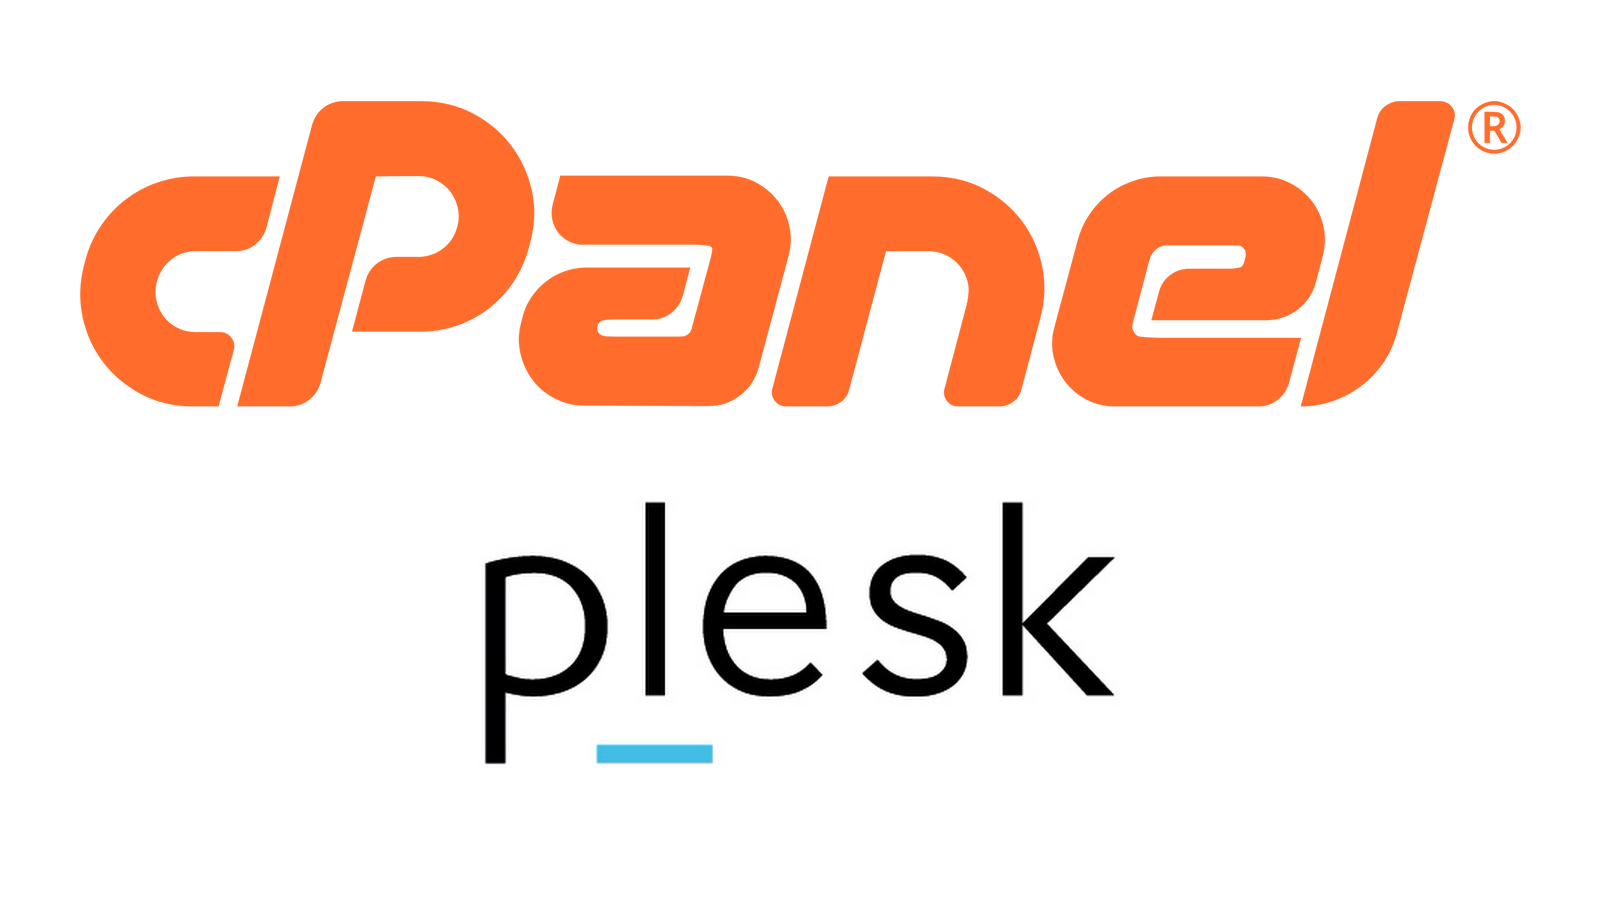 A breakdown of cPanel and Plesk